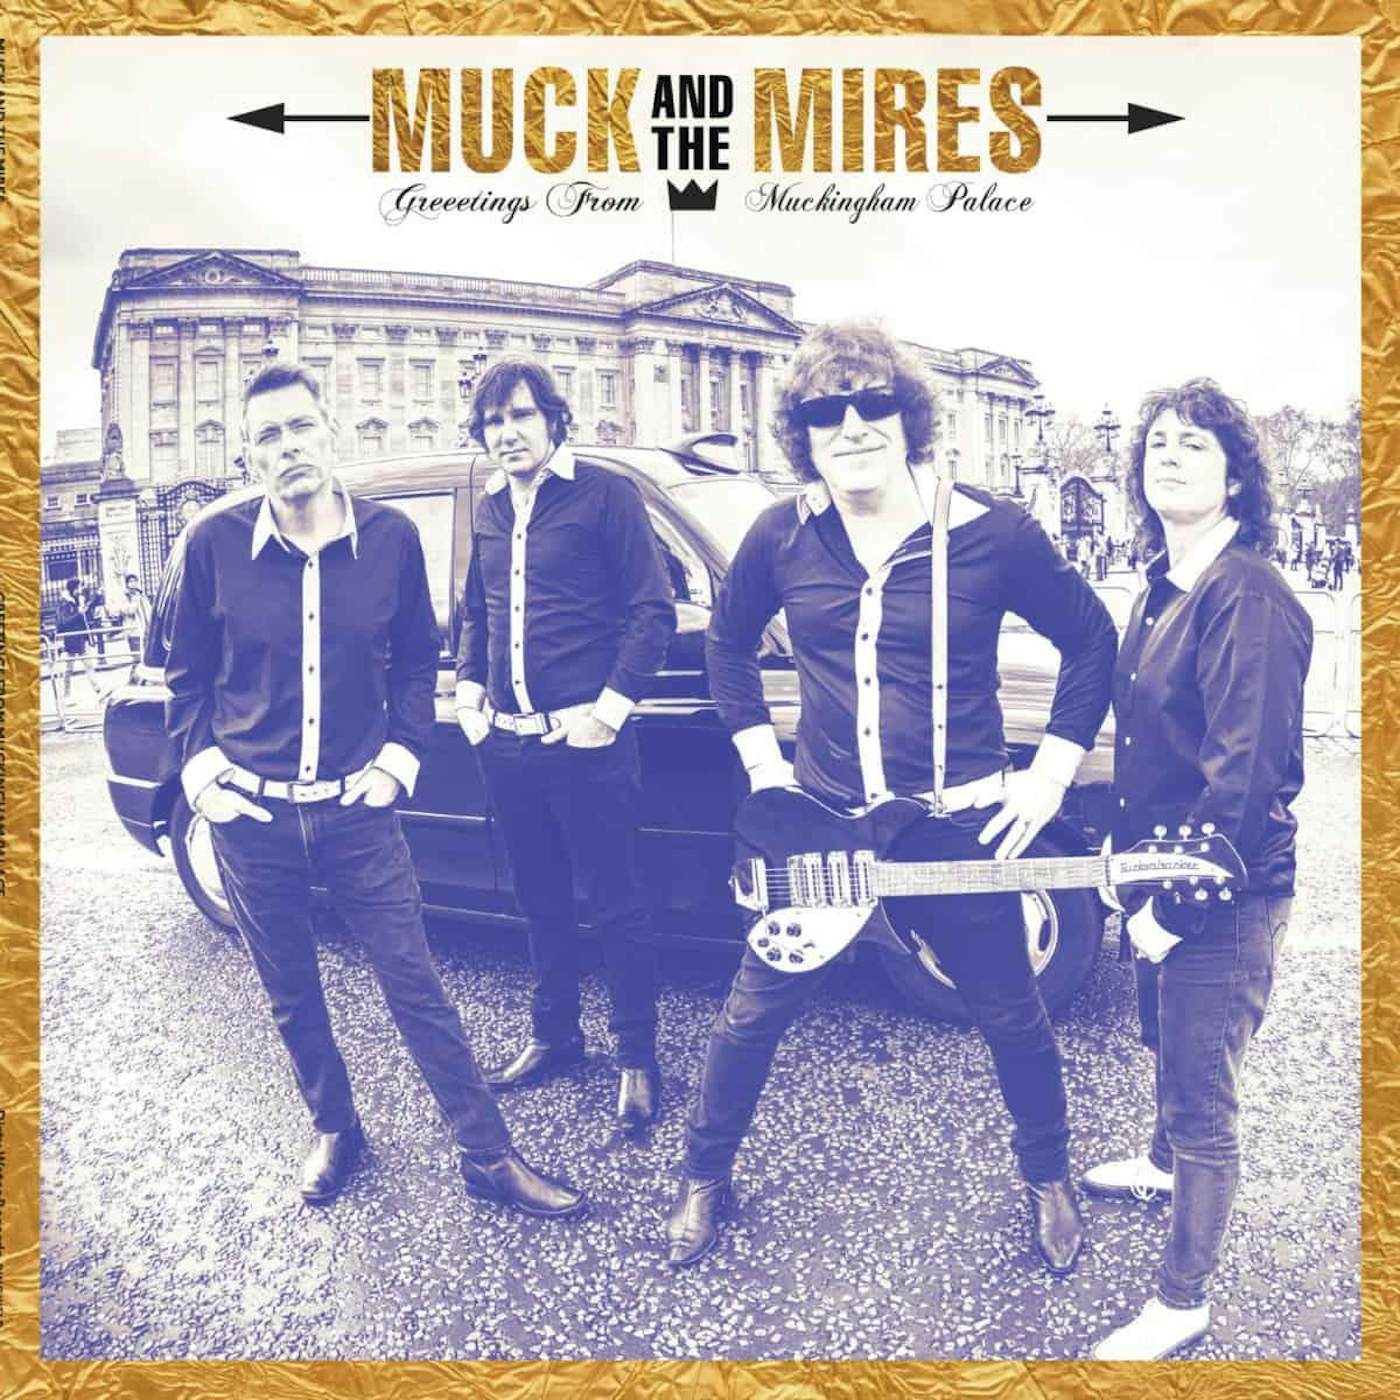 Muck & The Mires Greetings from Muckingham Palace Vinyl Record